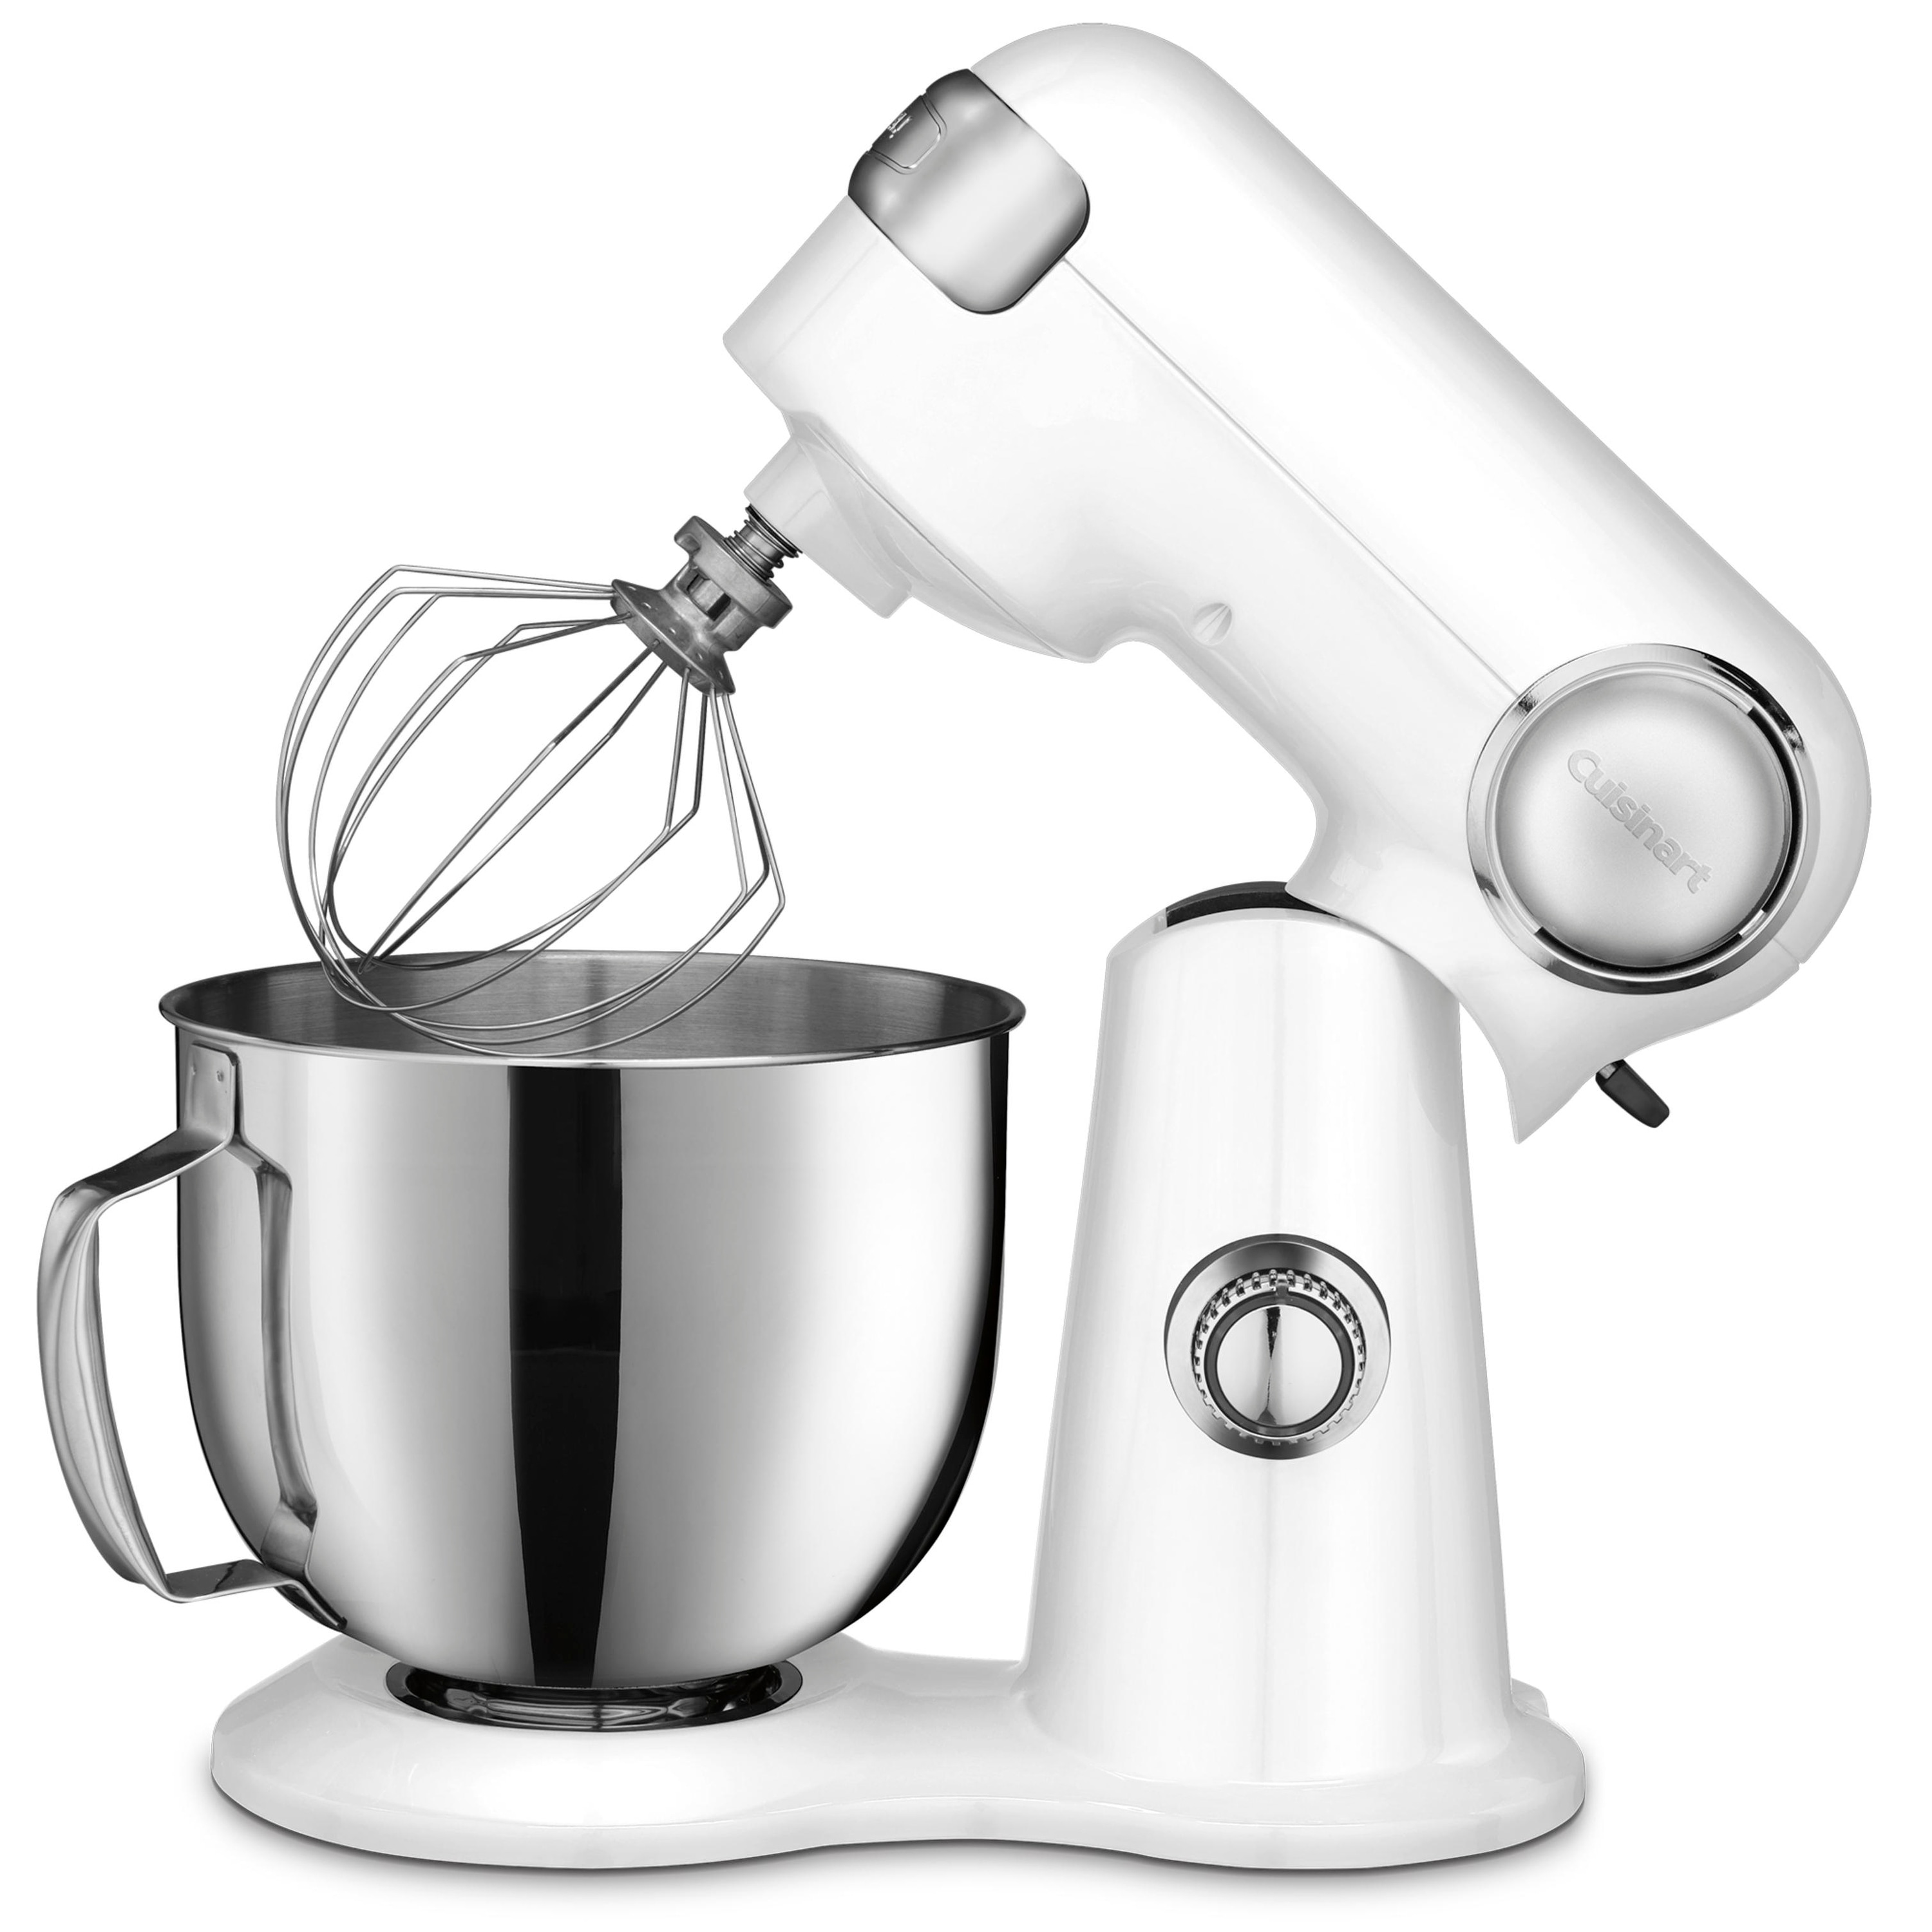 https://ak1.ostkcdn.com/images/products/is/images/direct/f8daaee394ccc3aeb83603527b55771688051a57/Cuisinart-Precision-Master-5.5-Quart-Stand-Mixer.jpg